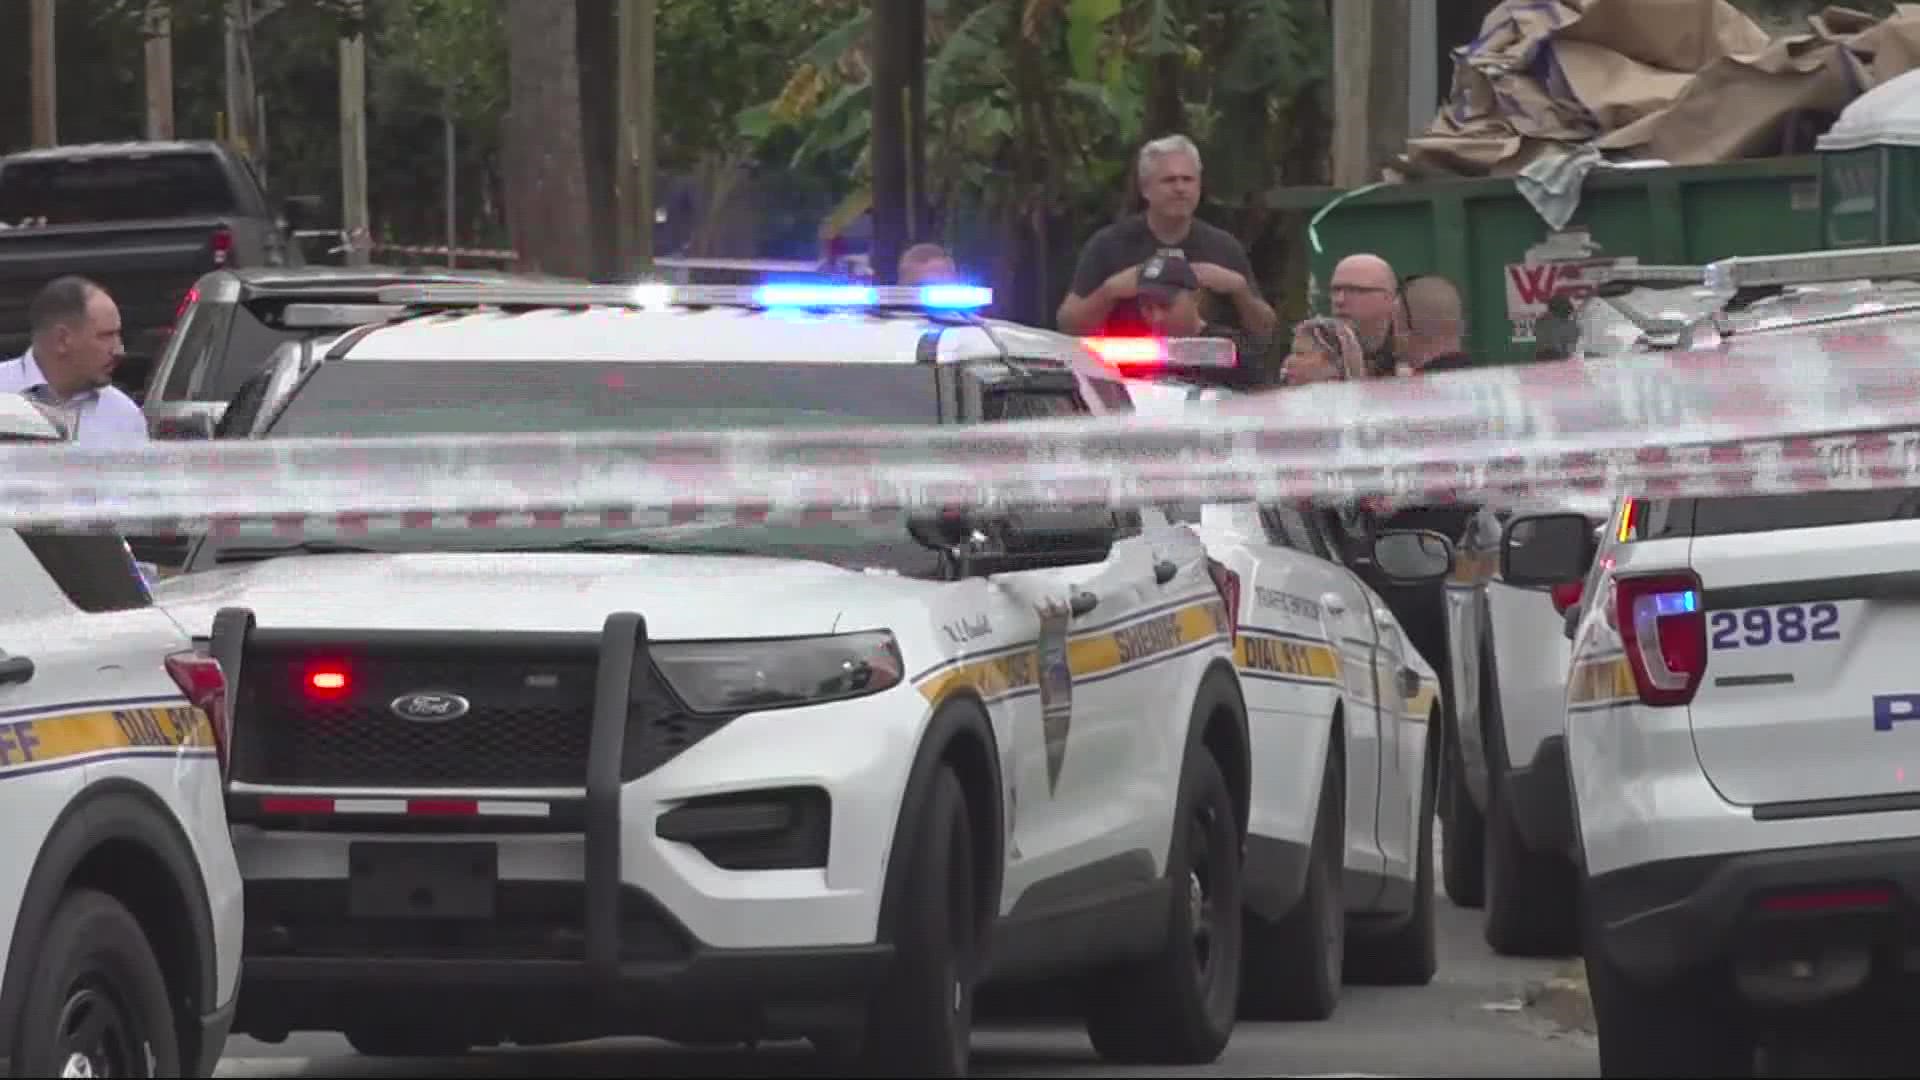 A man is recovering after an officer-involved shooting in the Murray Hill area Tuesday afternoon, according to JSO. Police discovered that the rifle was an airgun.